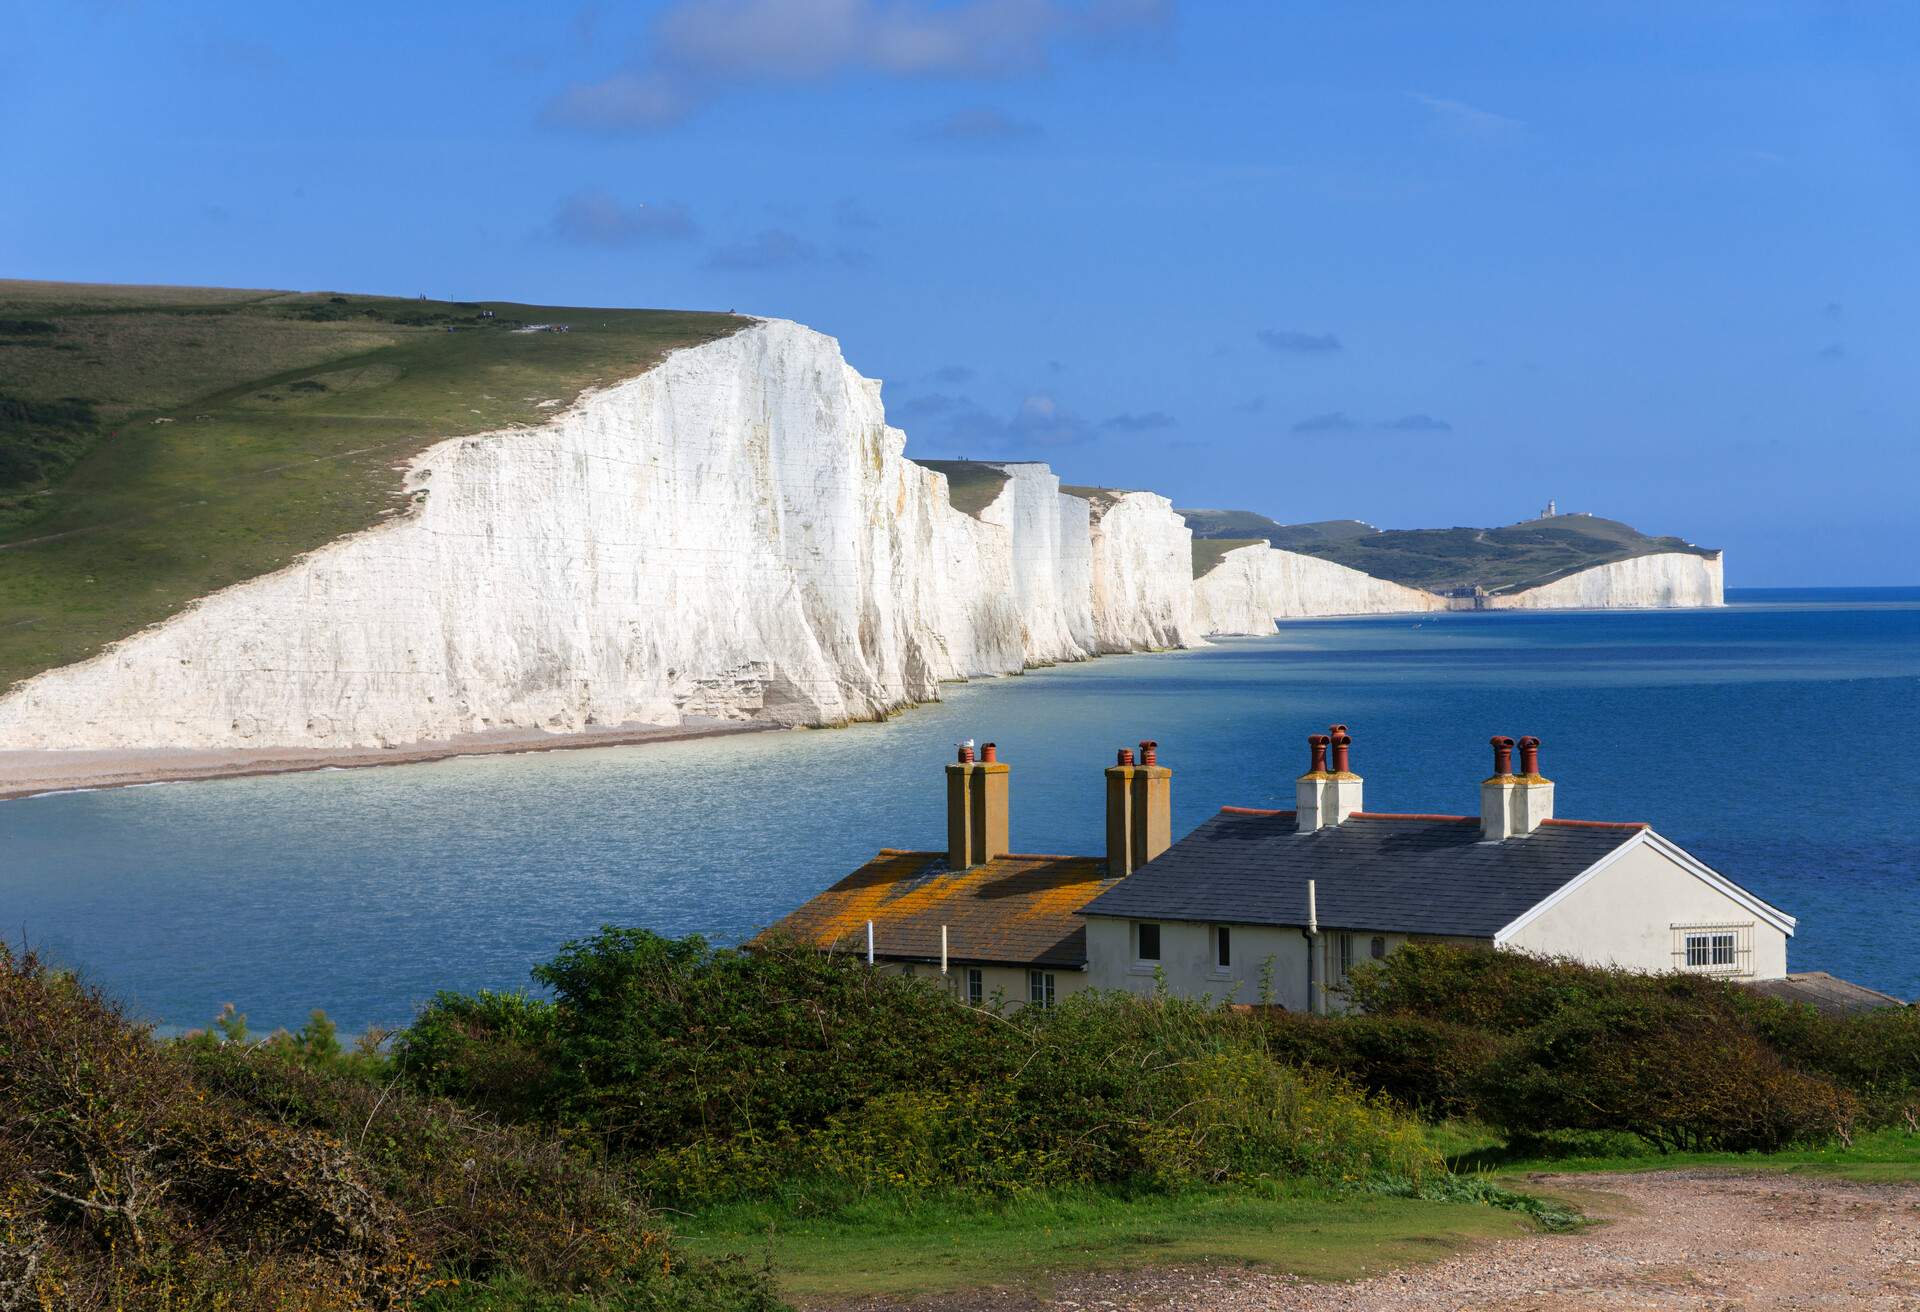 DEST_UK_ENGLAND_SOUTH-DOWNS-WAY_SEVEN-SISTERS_GettyImages-175533478